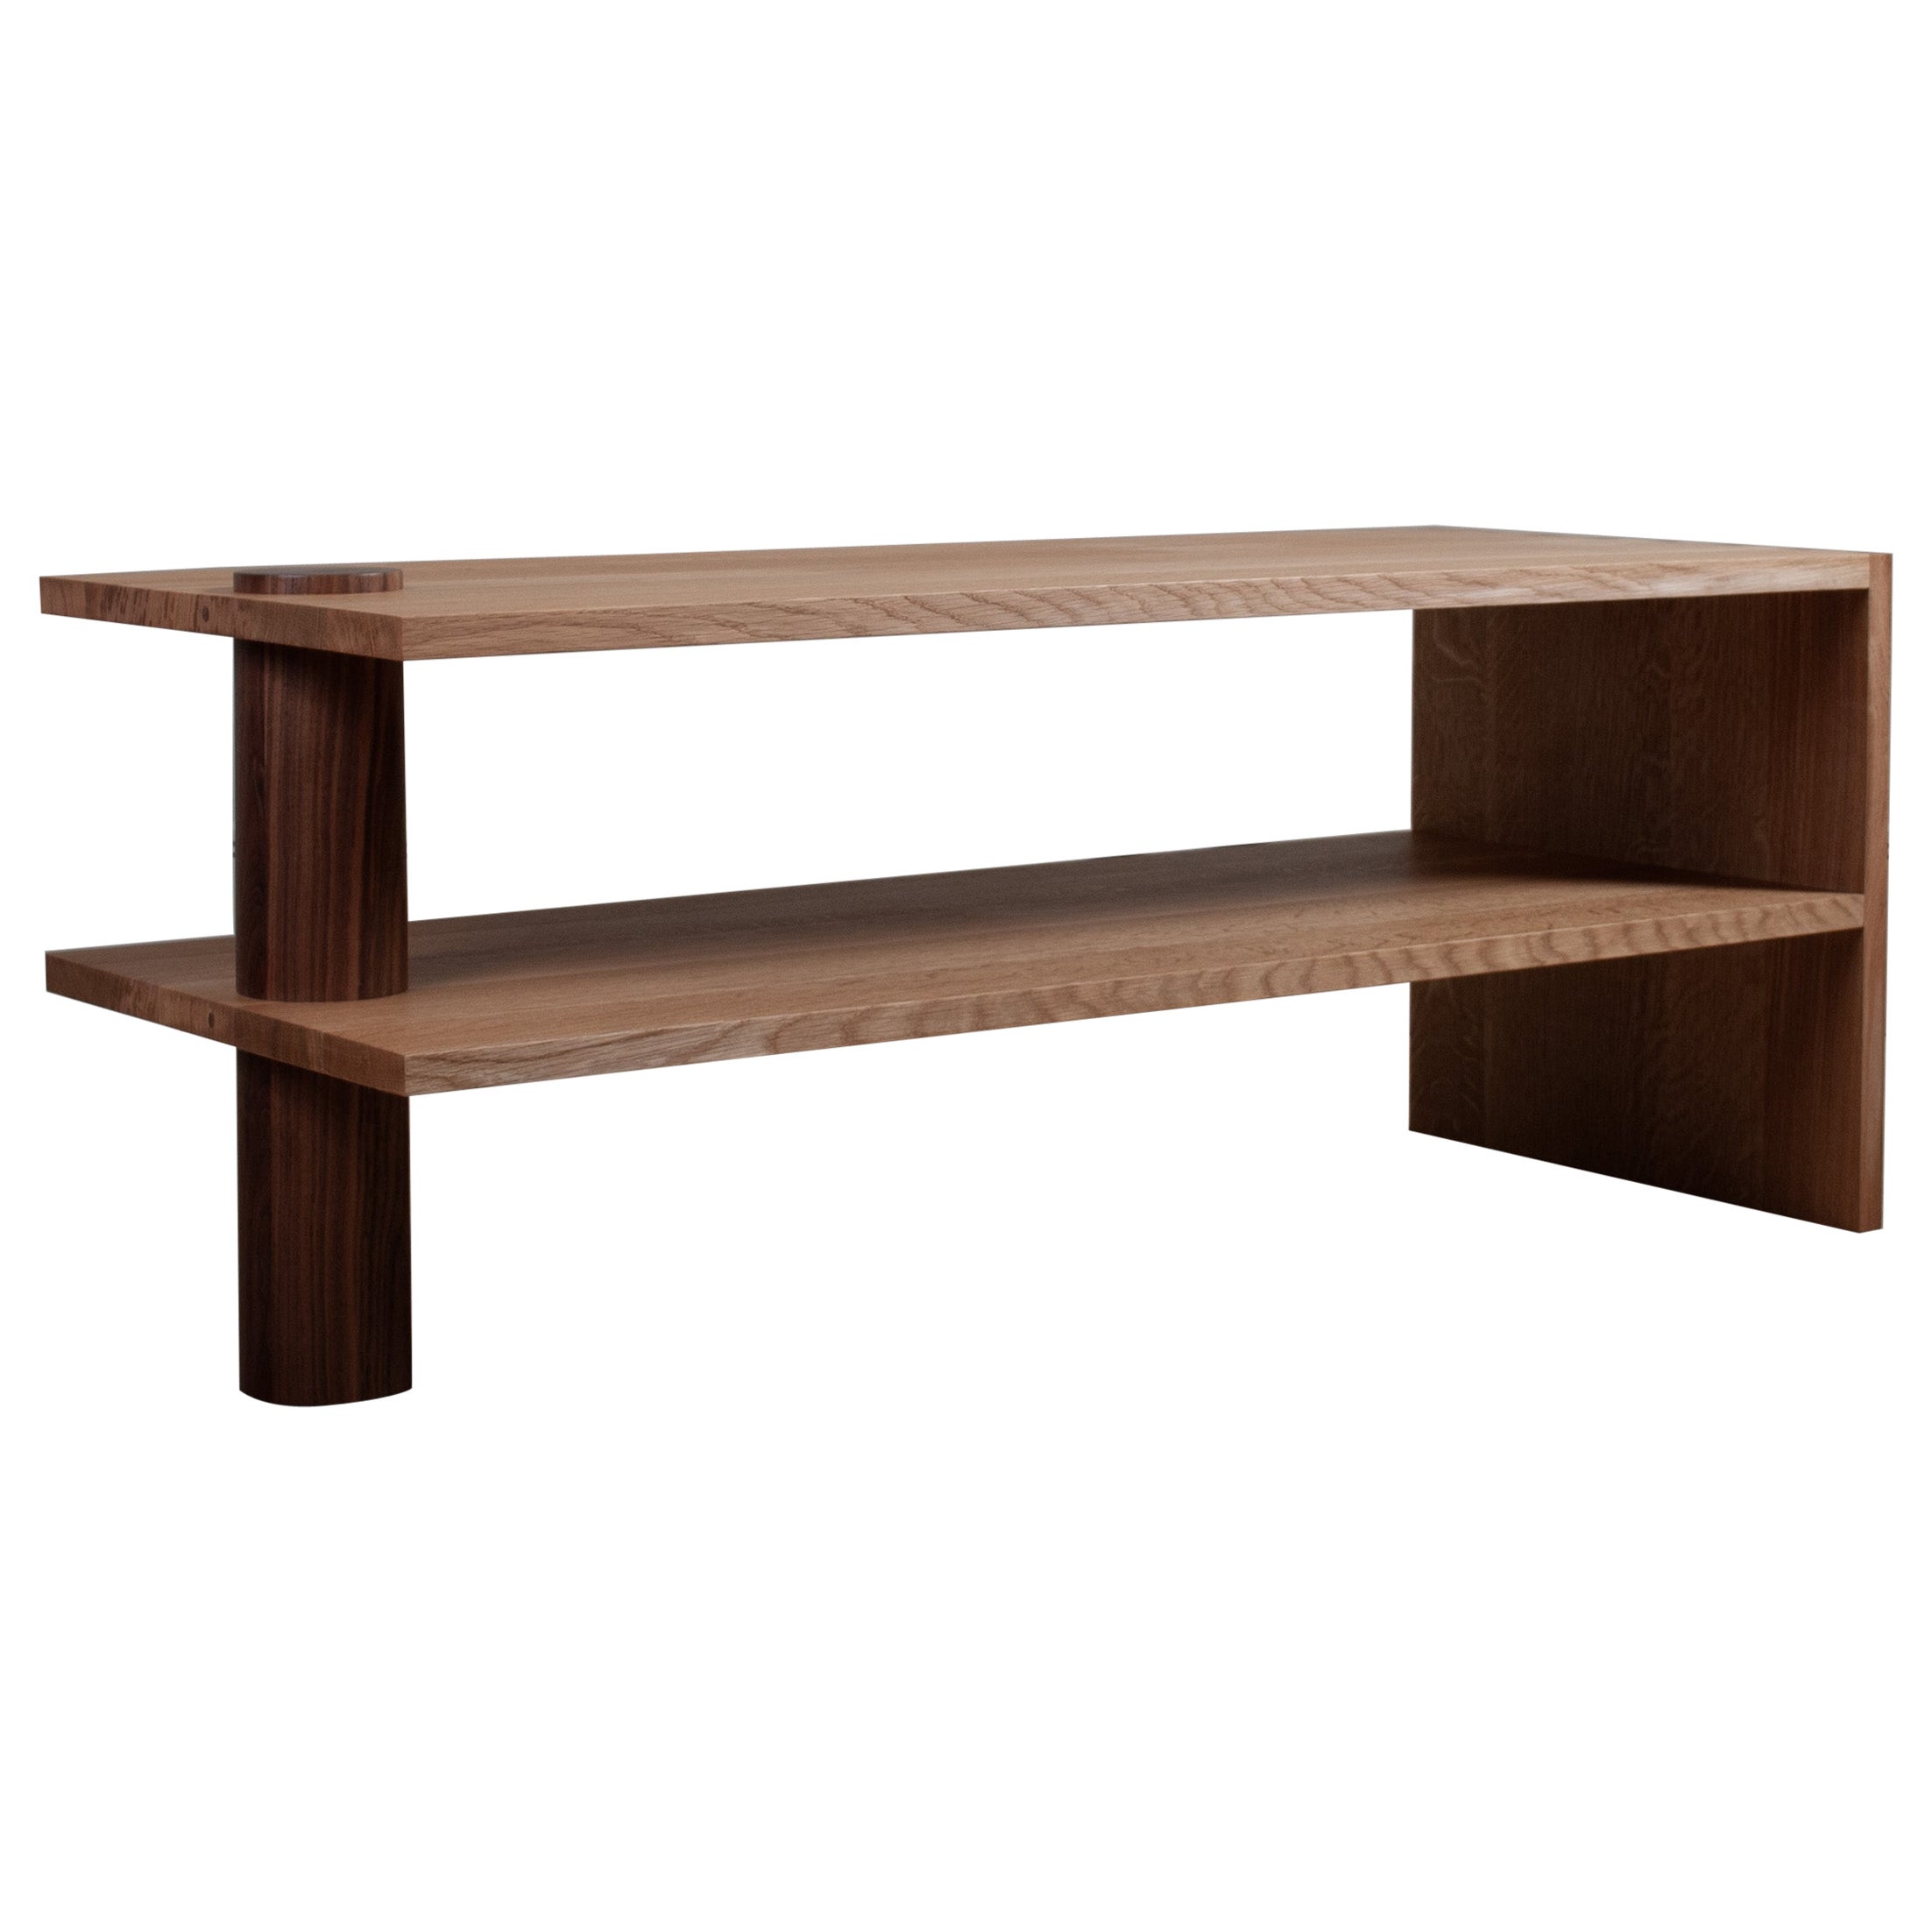 Mighty Architectural Oak & Walnut Sofa Table For Sale